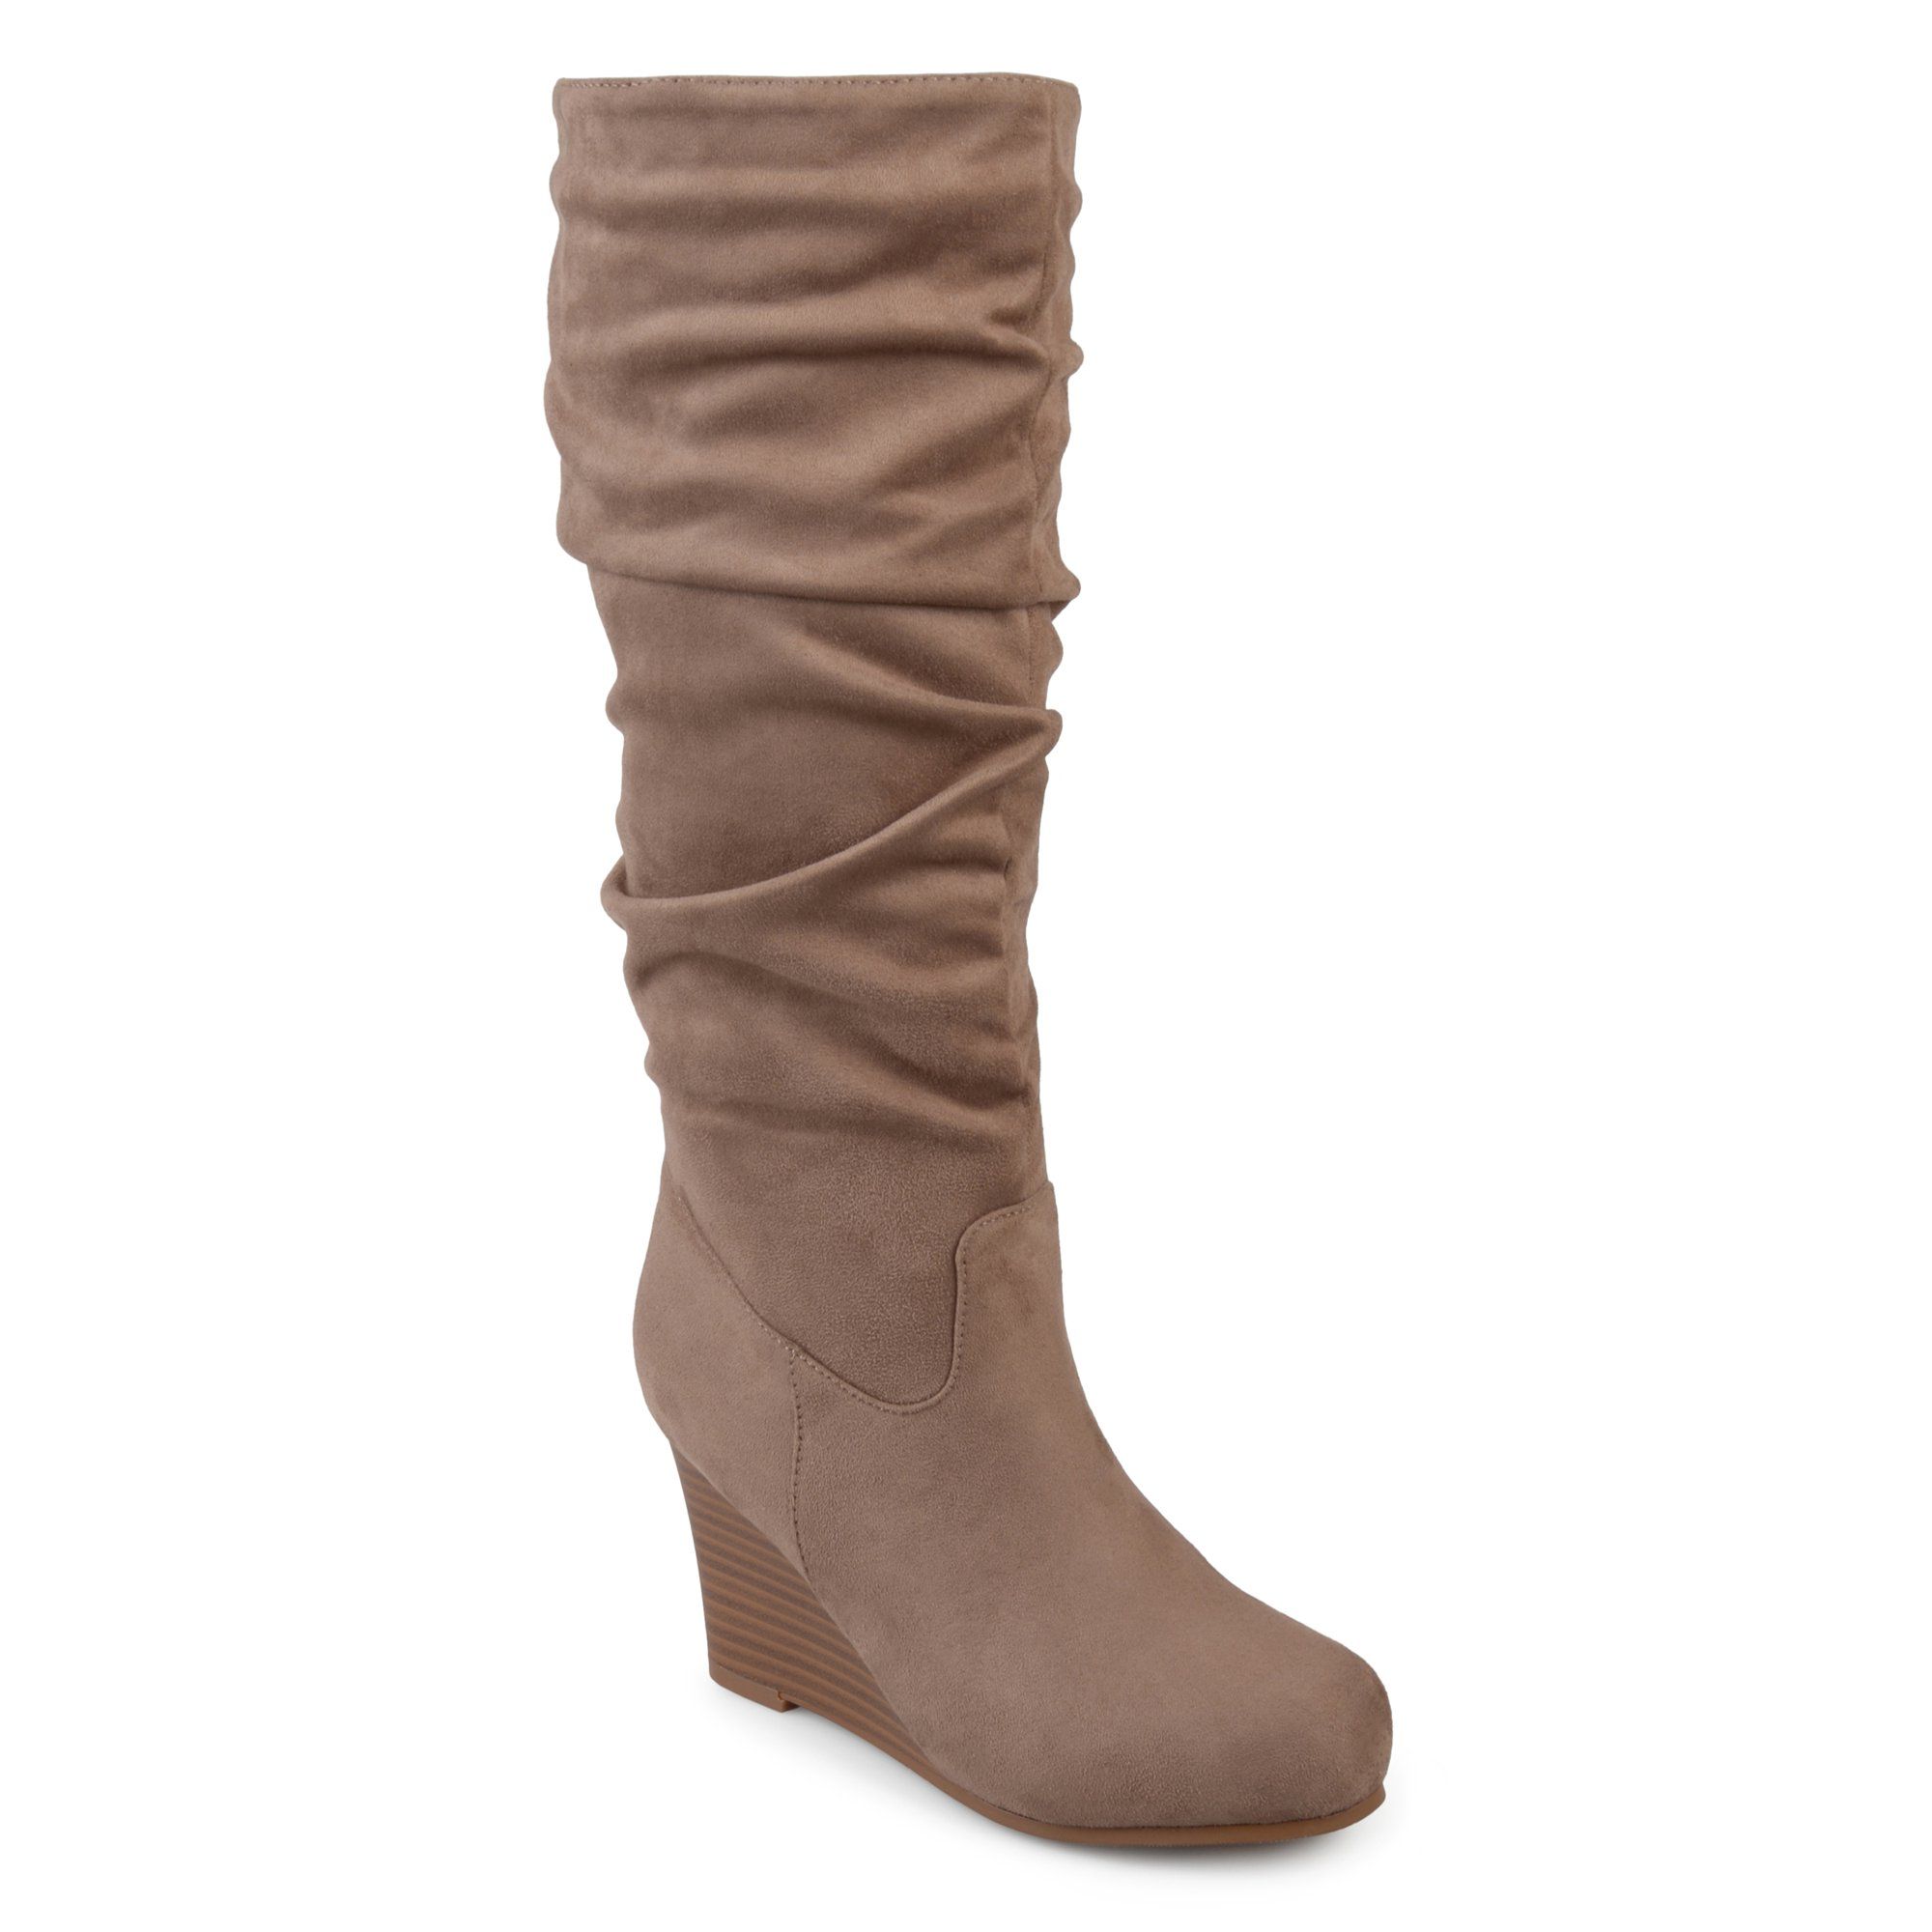 Women's Wide Calf Slouchy Faux Suede Mid-calf Wedge Boots | Walmart (US)